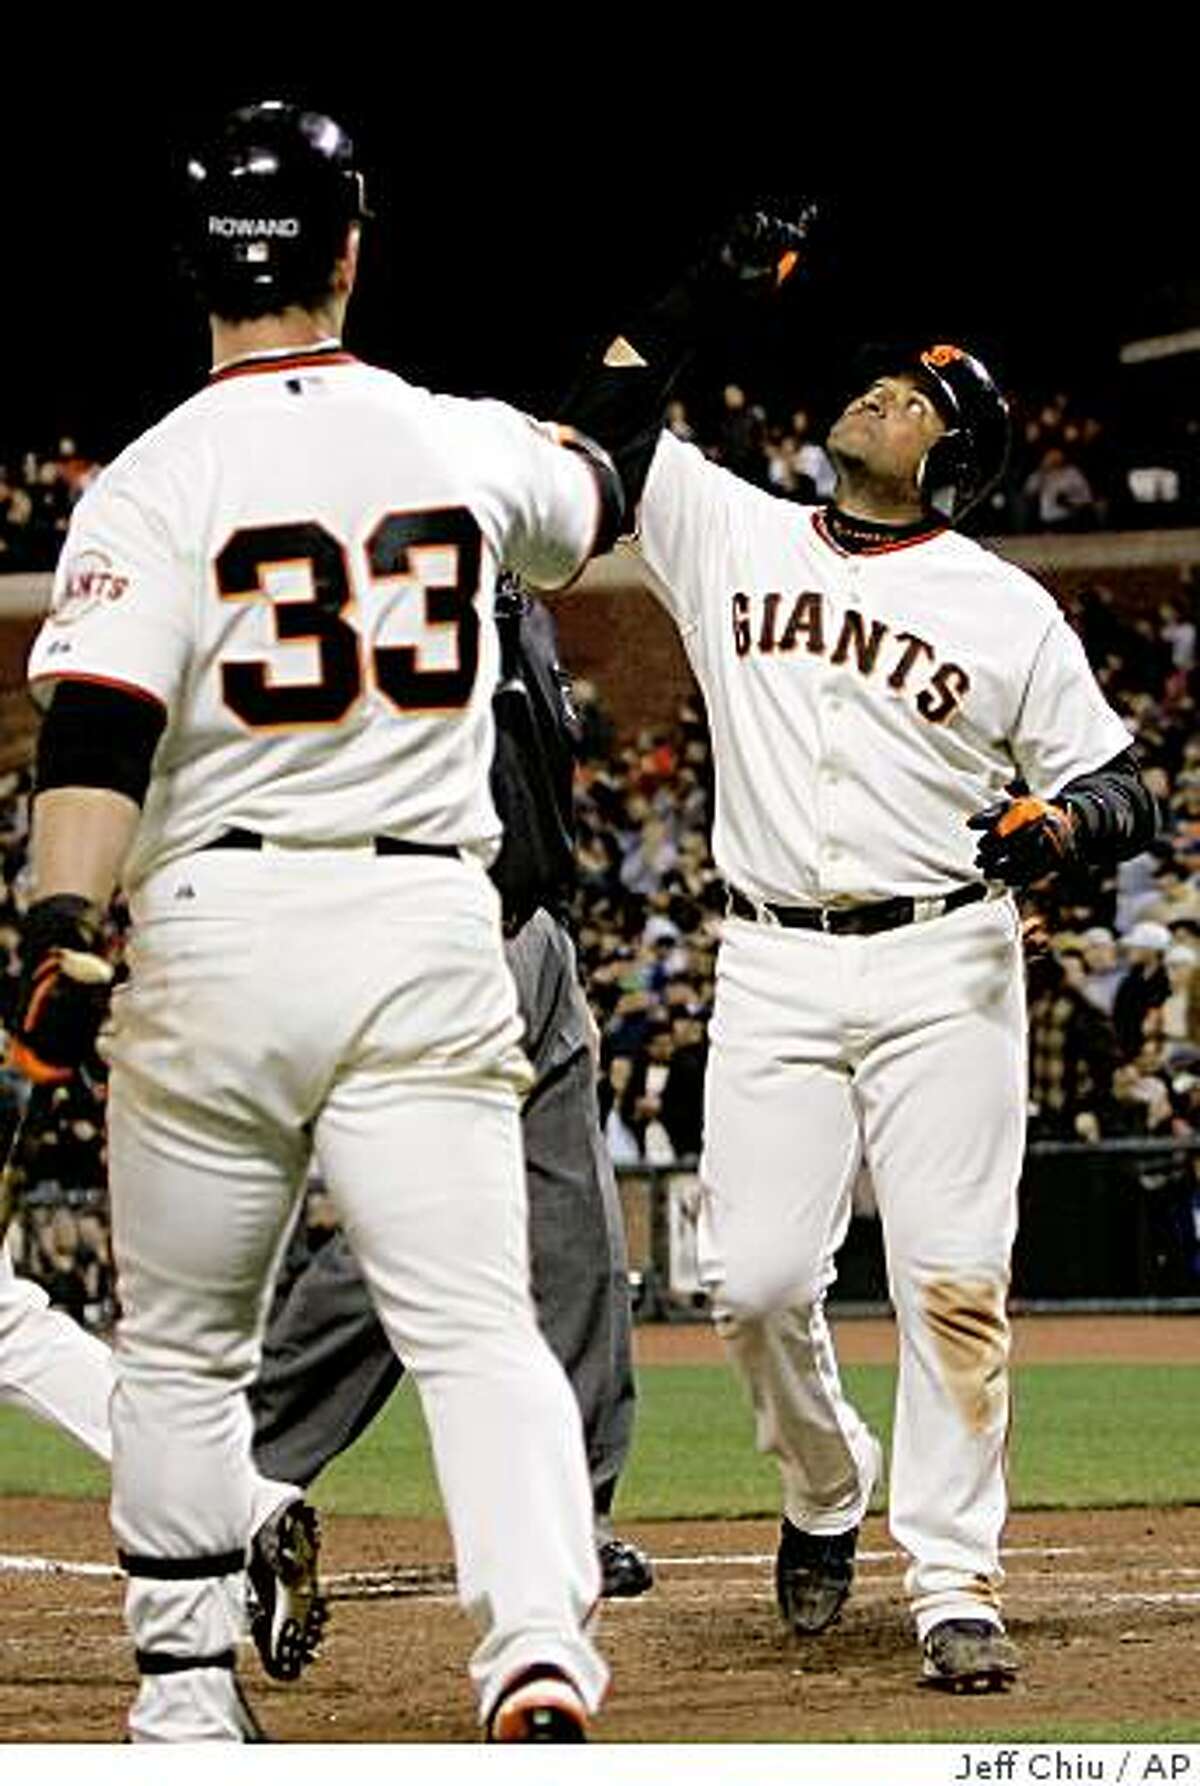 San Francisco Giants' Bengie Molina, right, celebrates after hitting a solo home run off of Los Angeles Dodgers' Scott Elbert in the seventh inning of a baseball game in San Francisco, Wednesday, April 29, 2009. At left is Giants' Aaron Rowand.